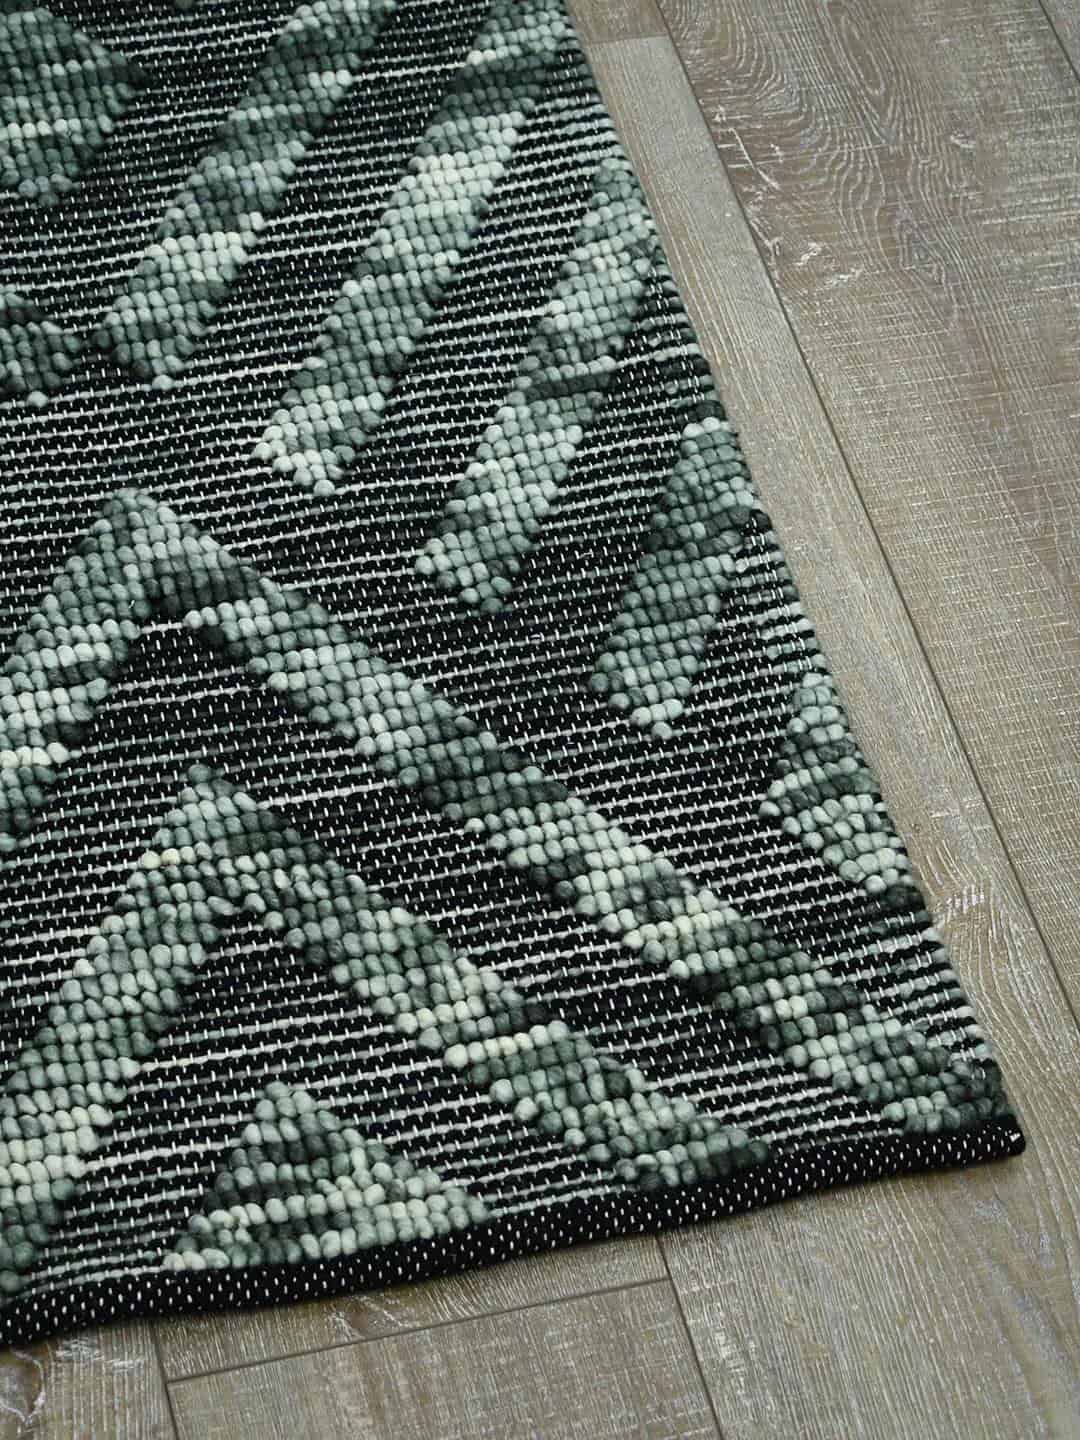 Zamora-Forest-green-stans-rug-centre-textured-wool